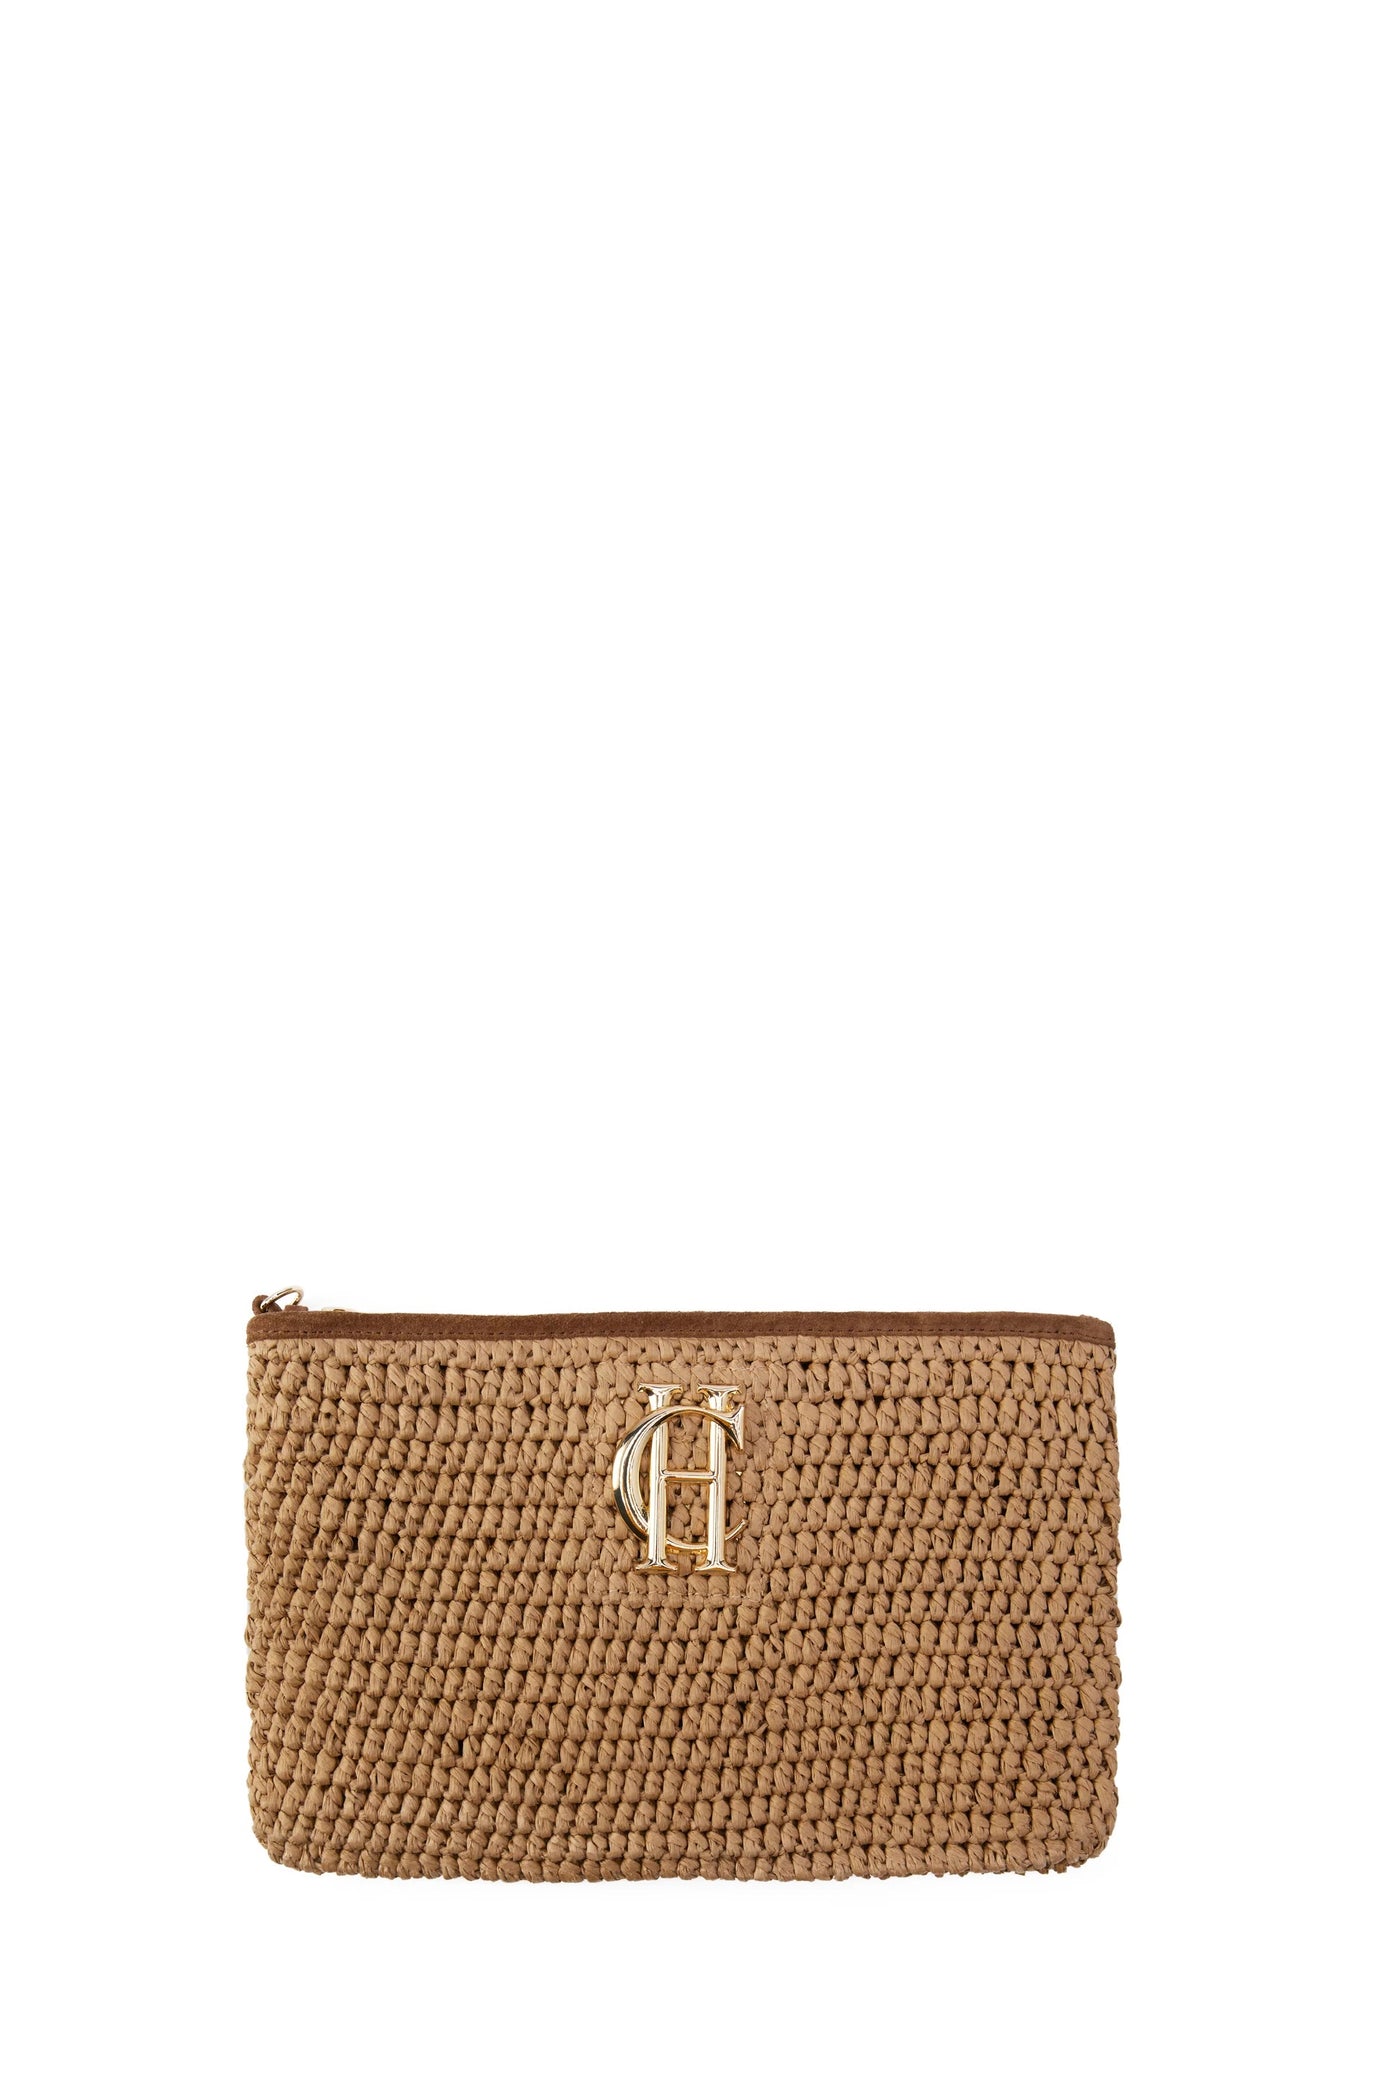 Holland Cooper Riviera Clutch Bag in Natural Front